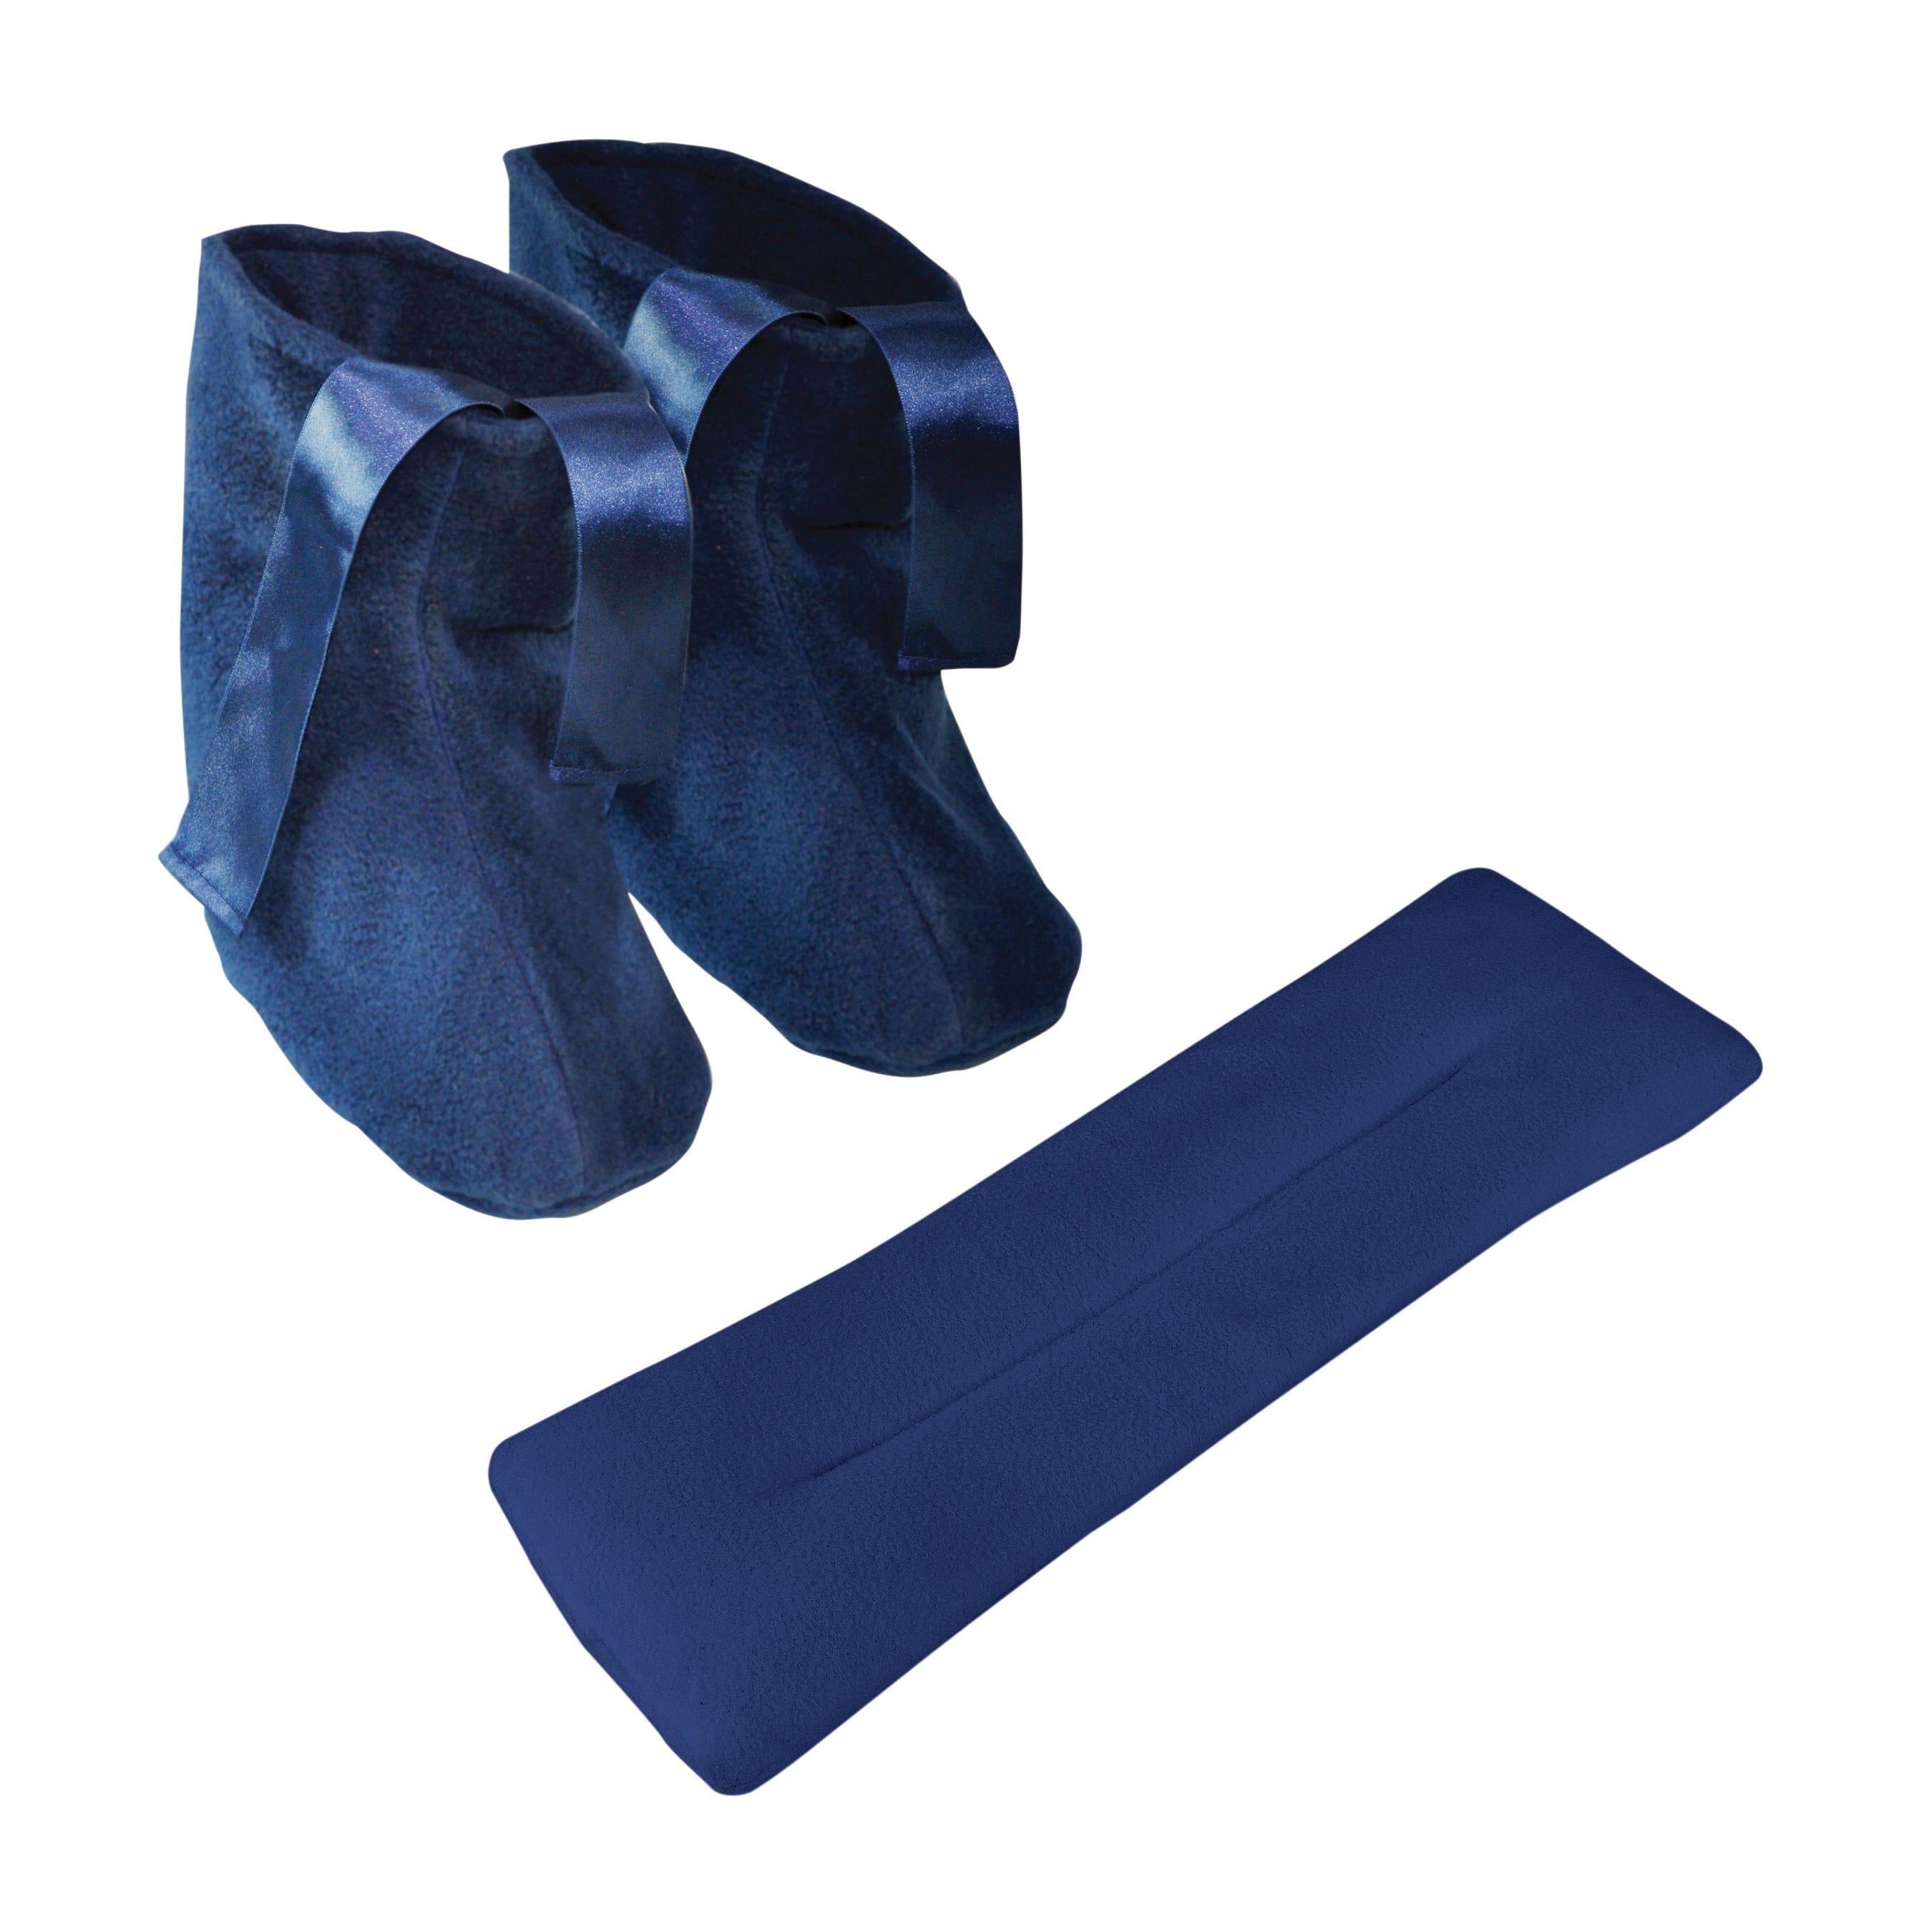 View Microwavable Slippers and Neck Warmer Set information